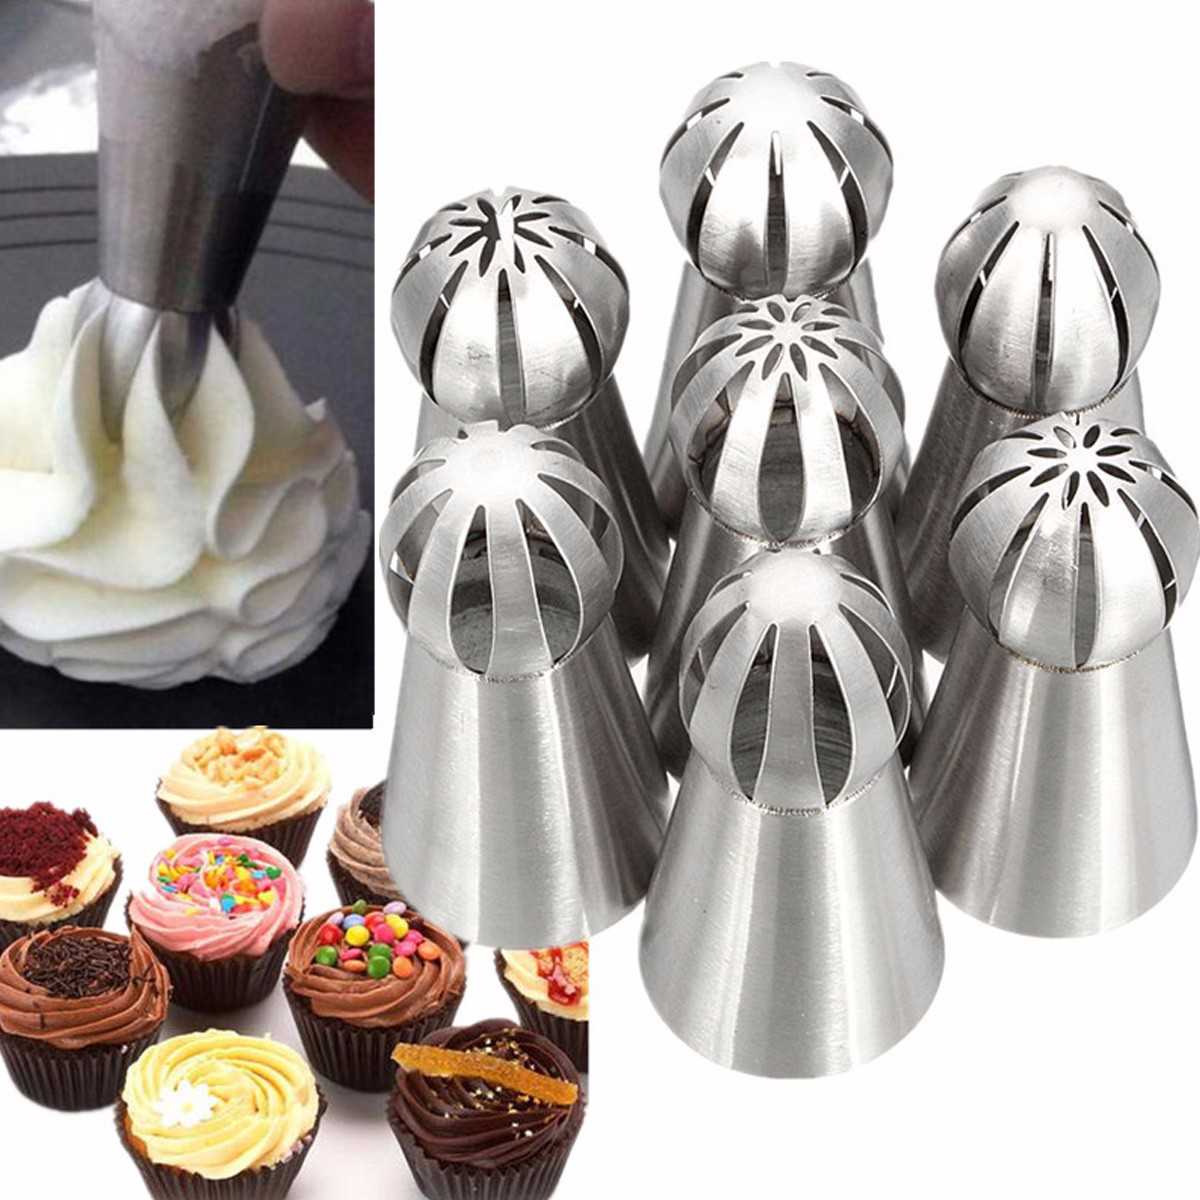 Meigar 7Pcs Russian Style Ball Cake Decorating Supplies Piping Tips in Home Stainless Steel Piping Nozzles Pastry Baking Tool DIY